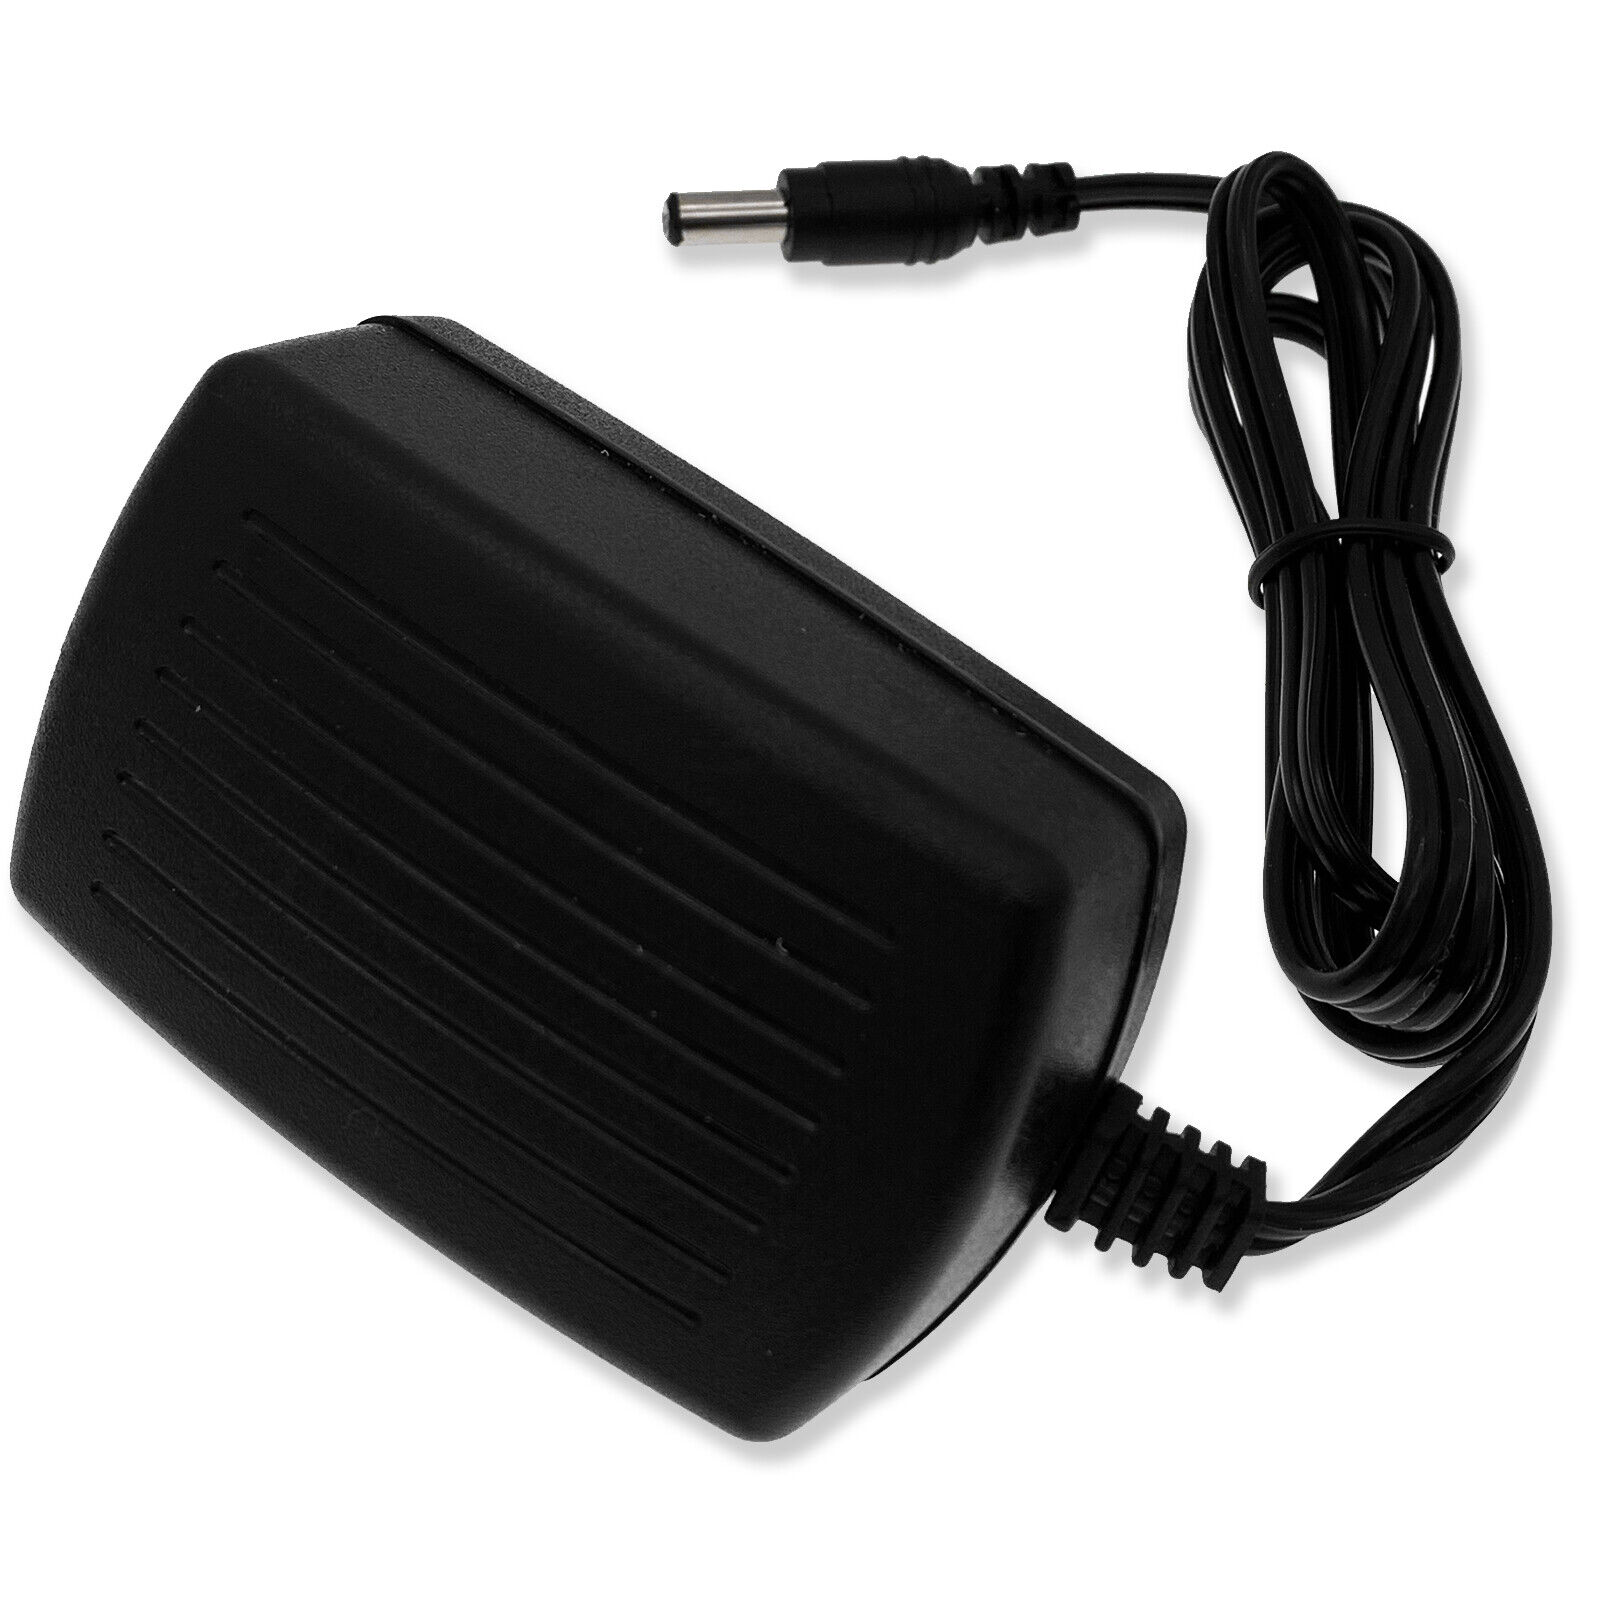 AC Adapter Charger for Nailene Sensationail Pro 3060 LED Lamp Nail Power Supply Type AC/DC Adapter Features Powered Com